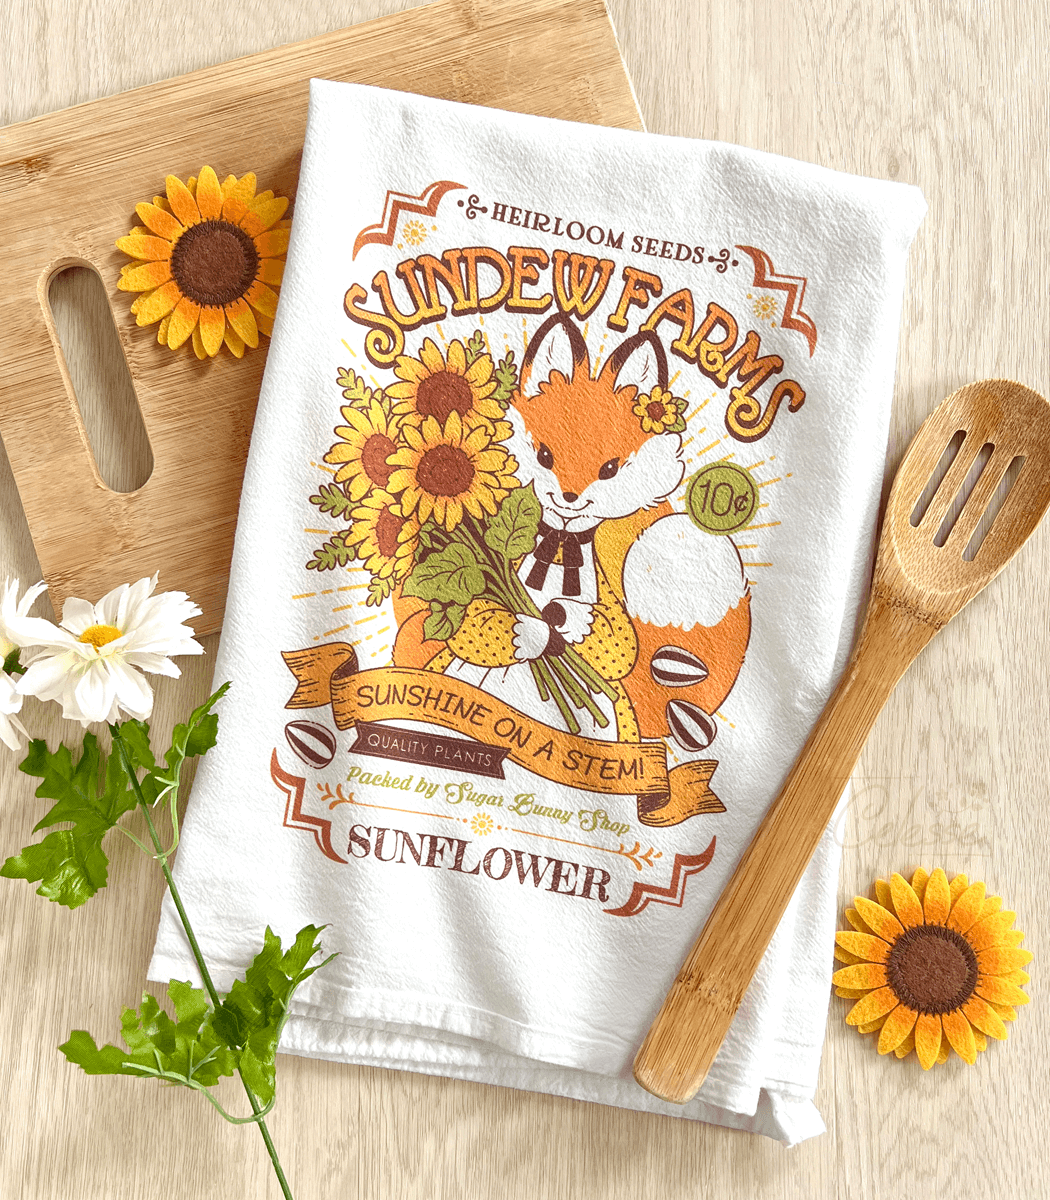 Tea Towels - What Are They And How Are They Used? - Farmers' Almanac - Plan  Your Day. Grow Your Life.